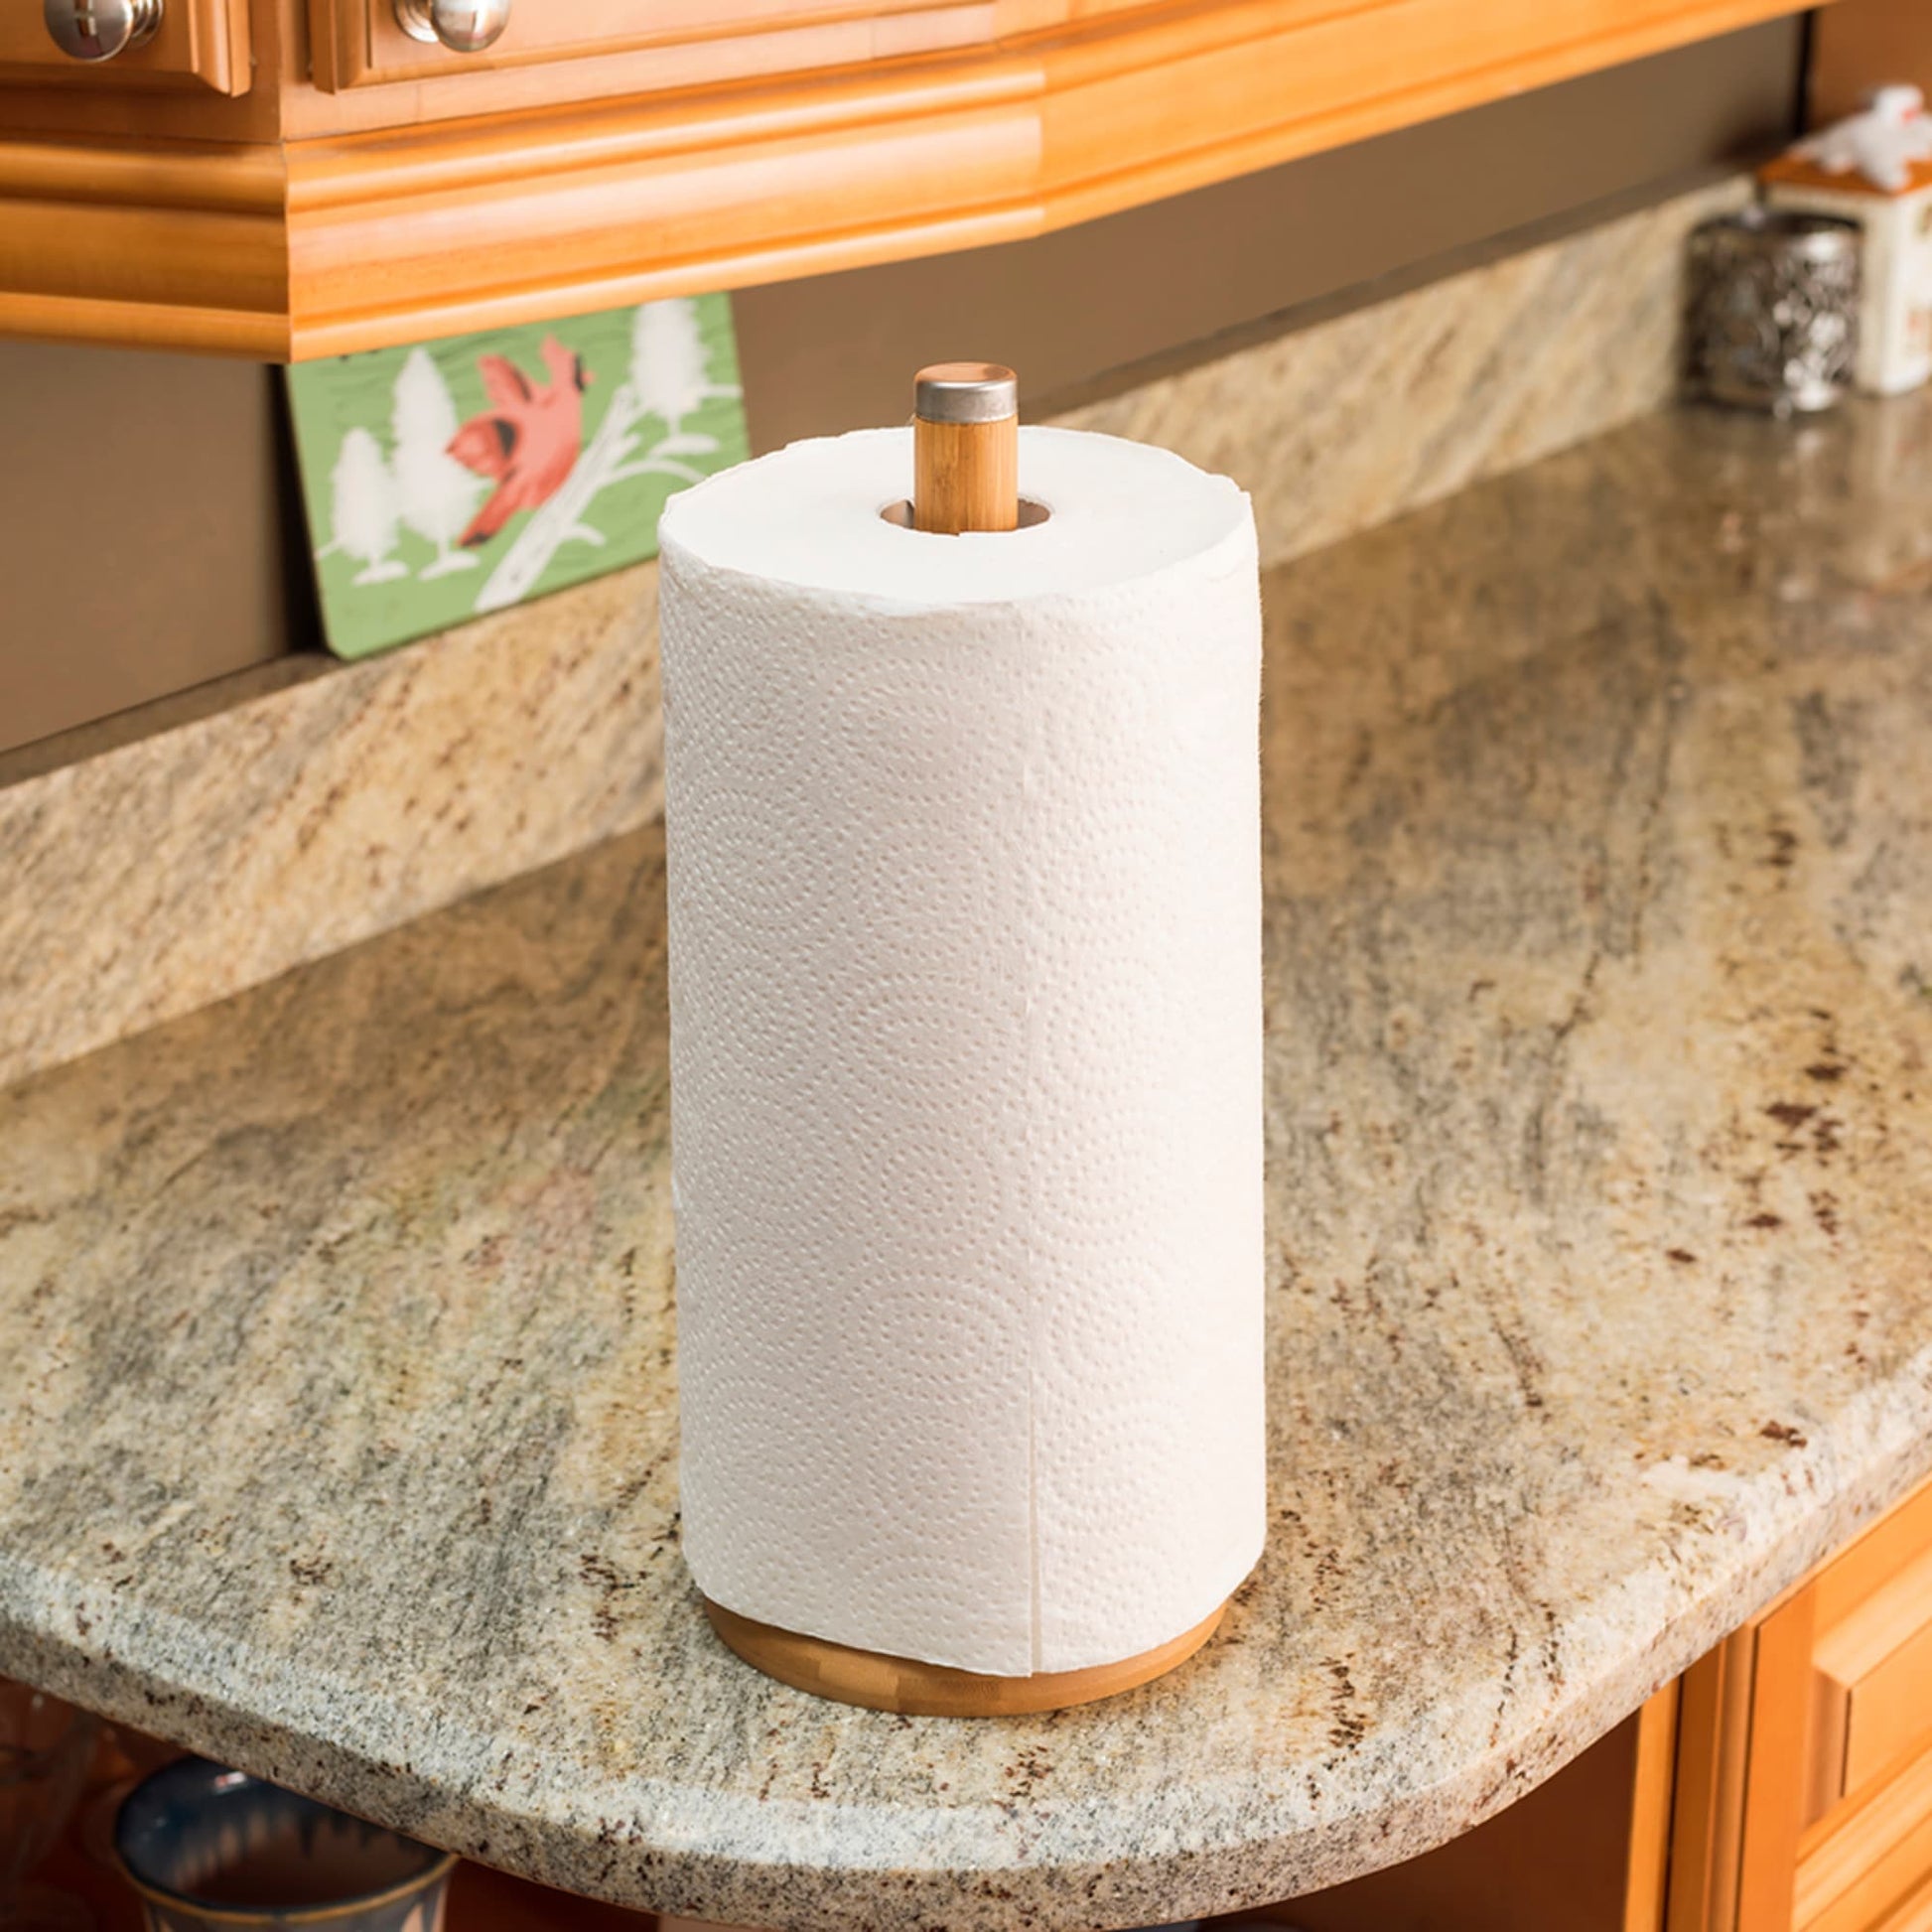  Greenco Wall Mount Paper Towel Holder, Made with